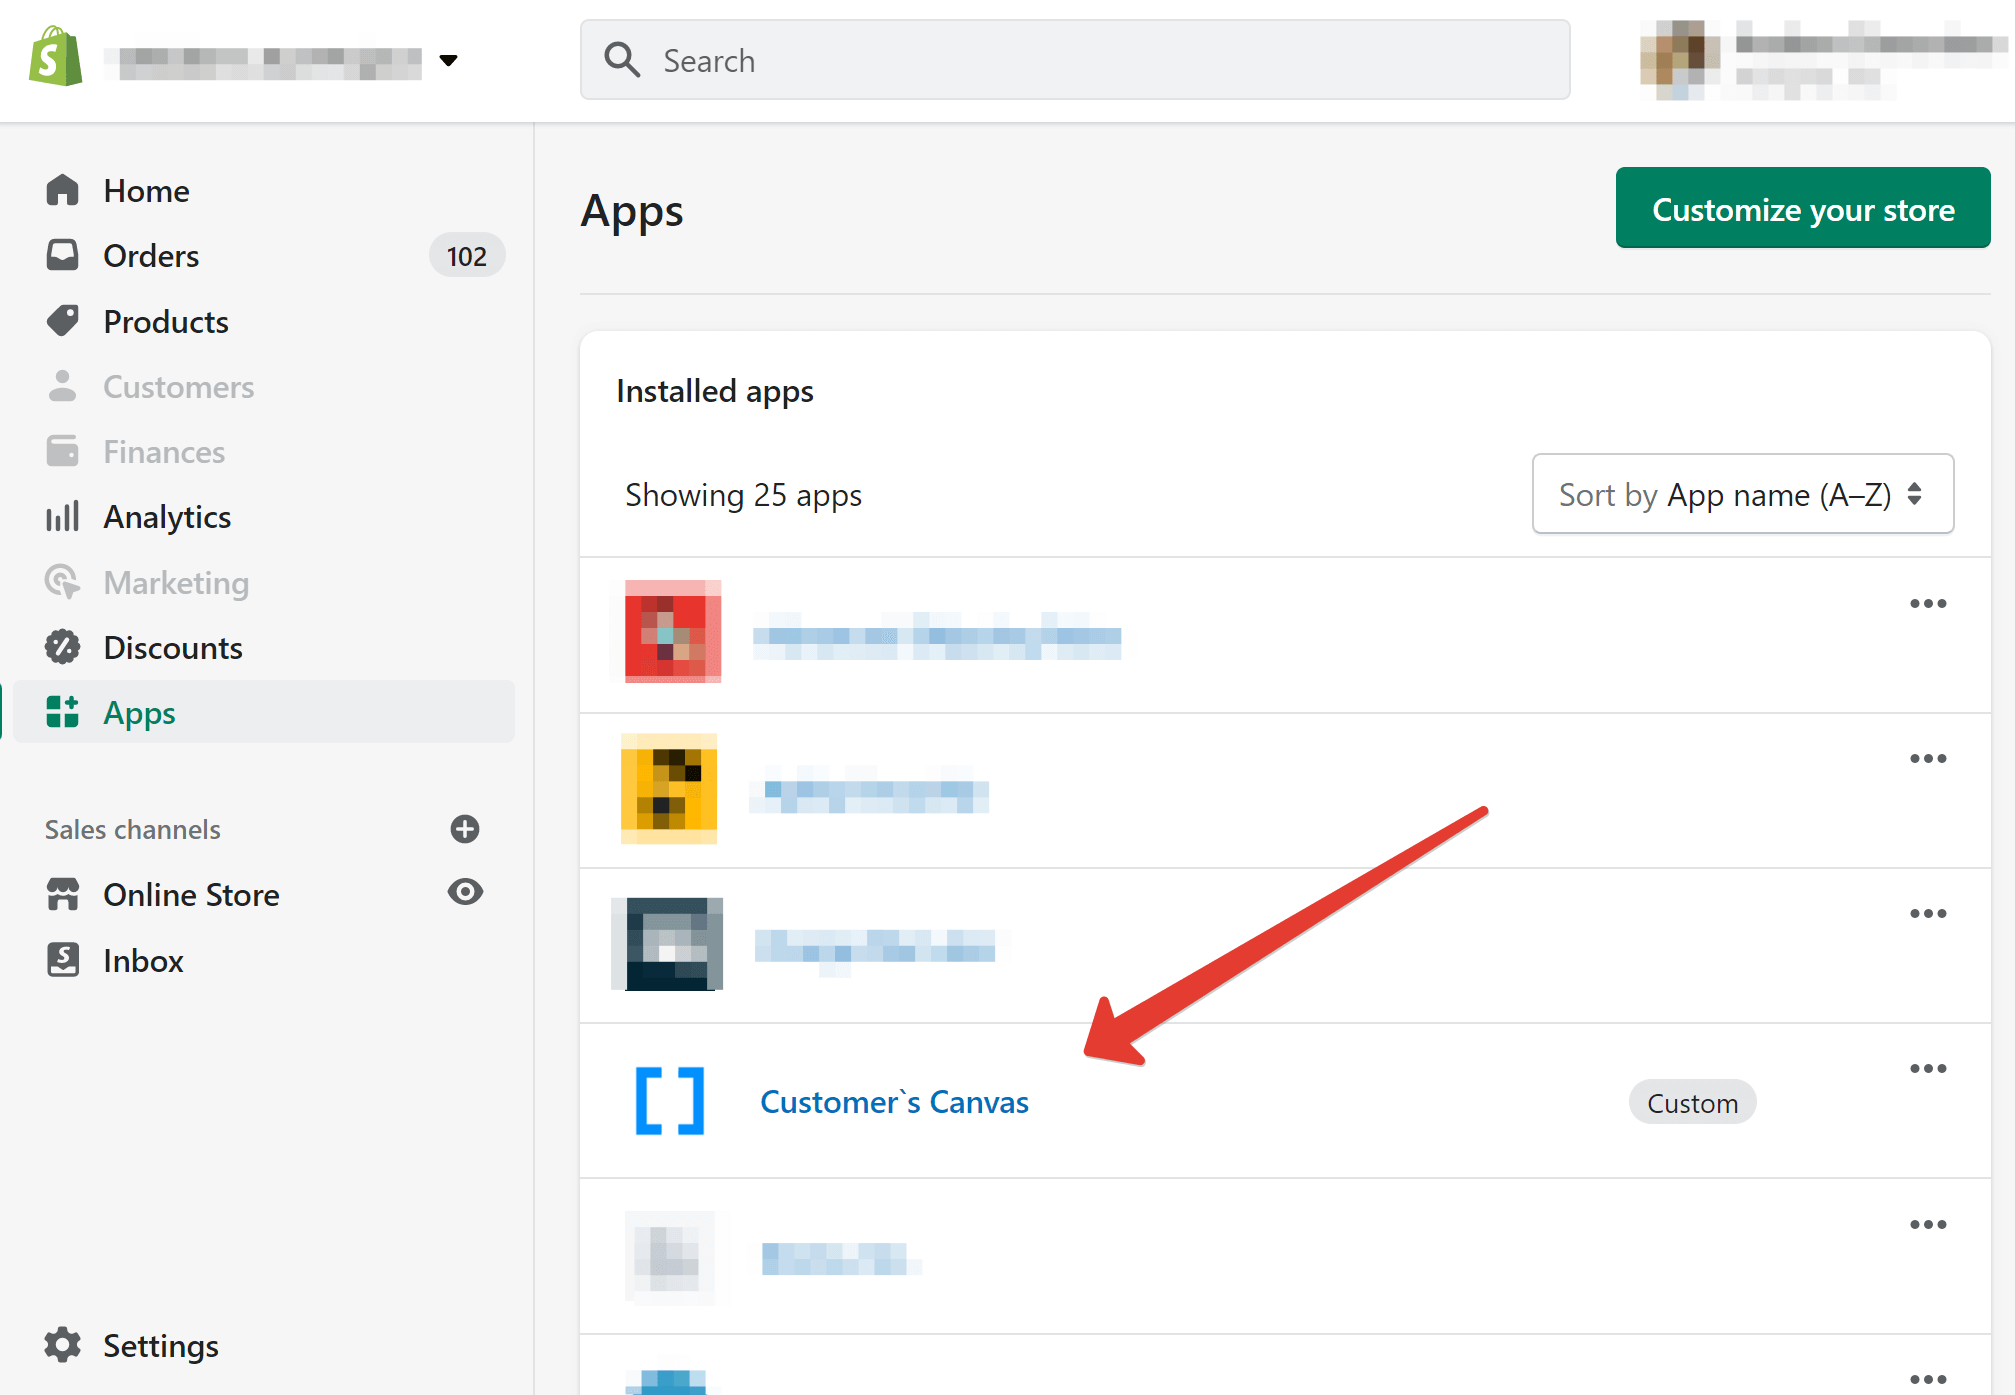 Customer's Canvas app in the Apps list